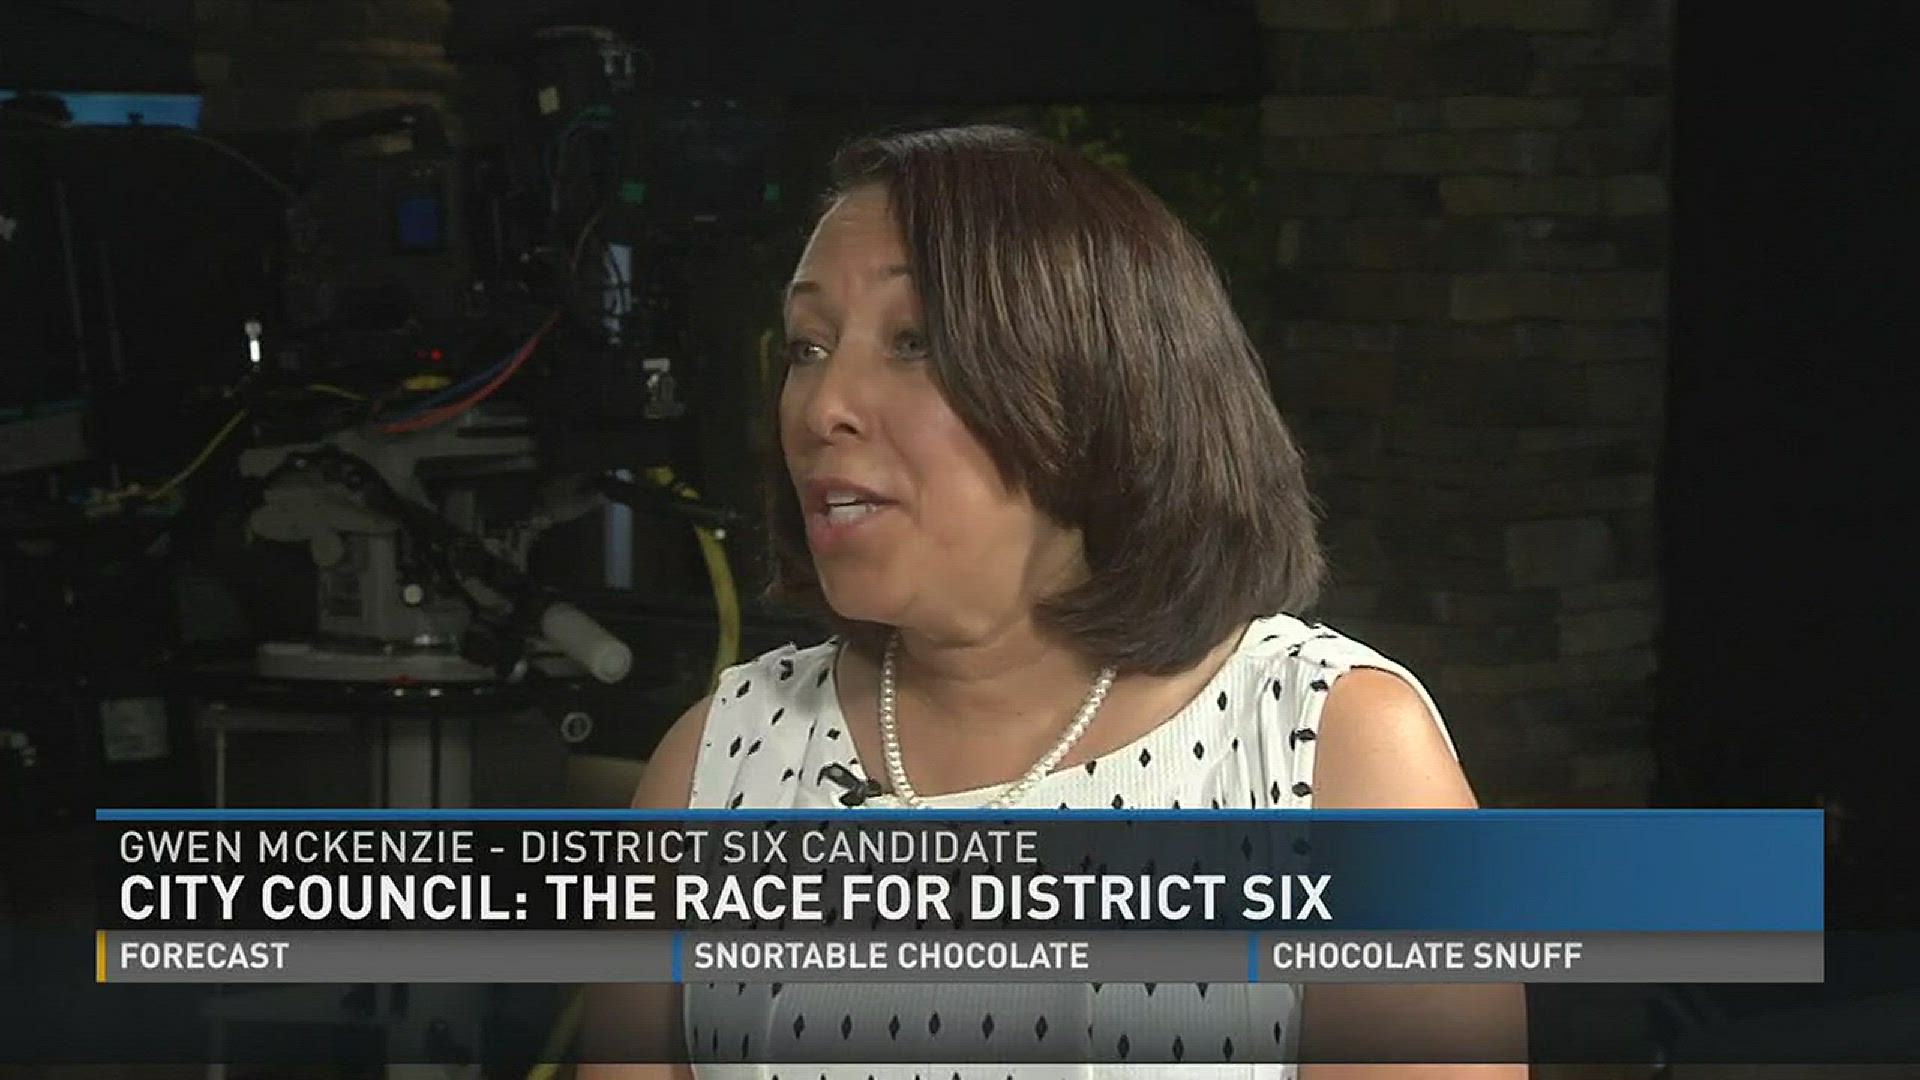 Knoxville city council race: district 6 candidate Gwen McKenzie